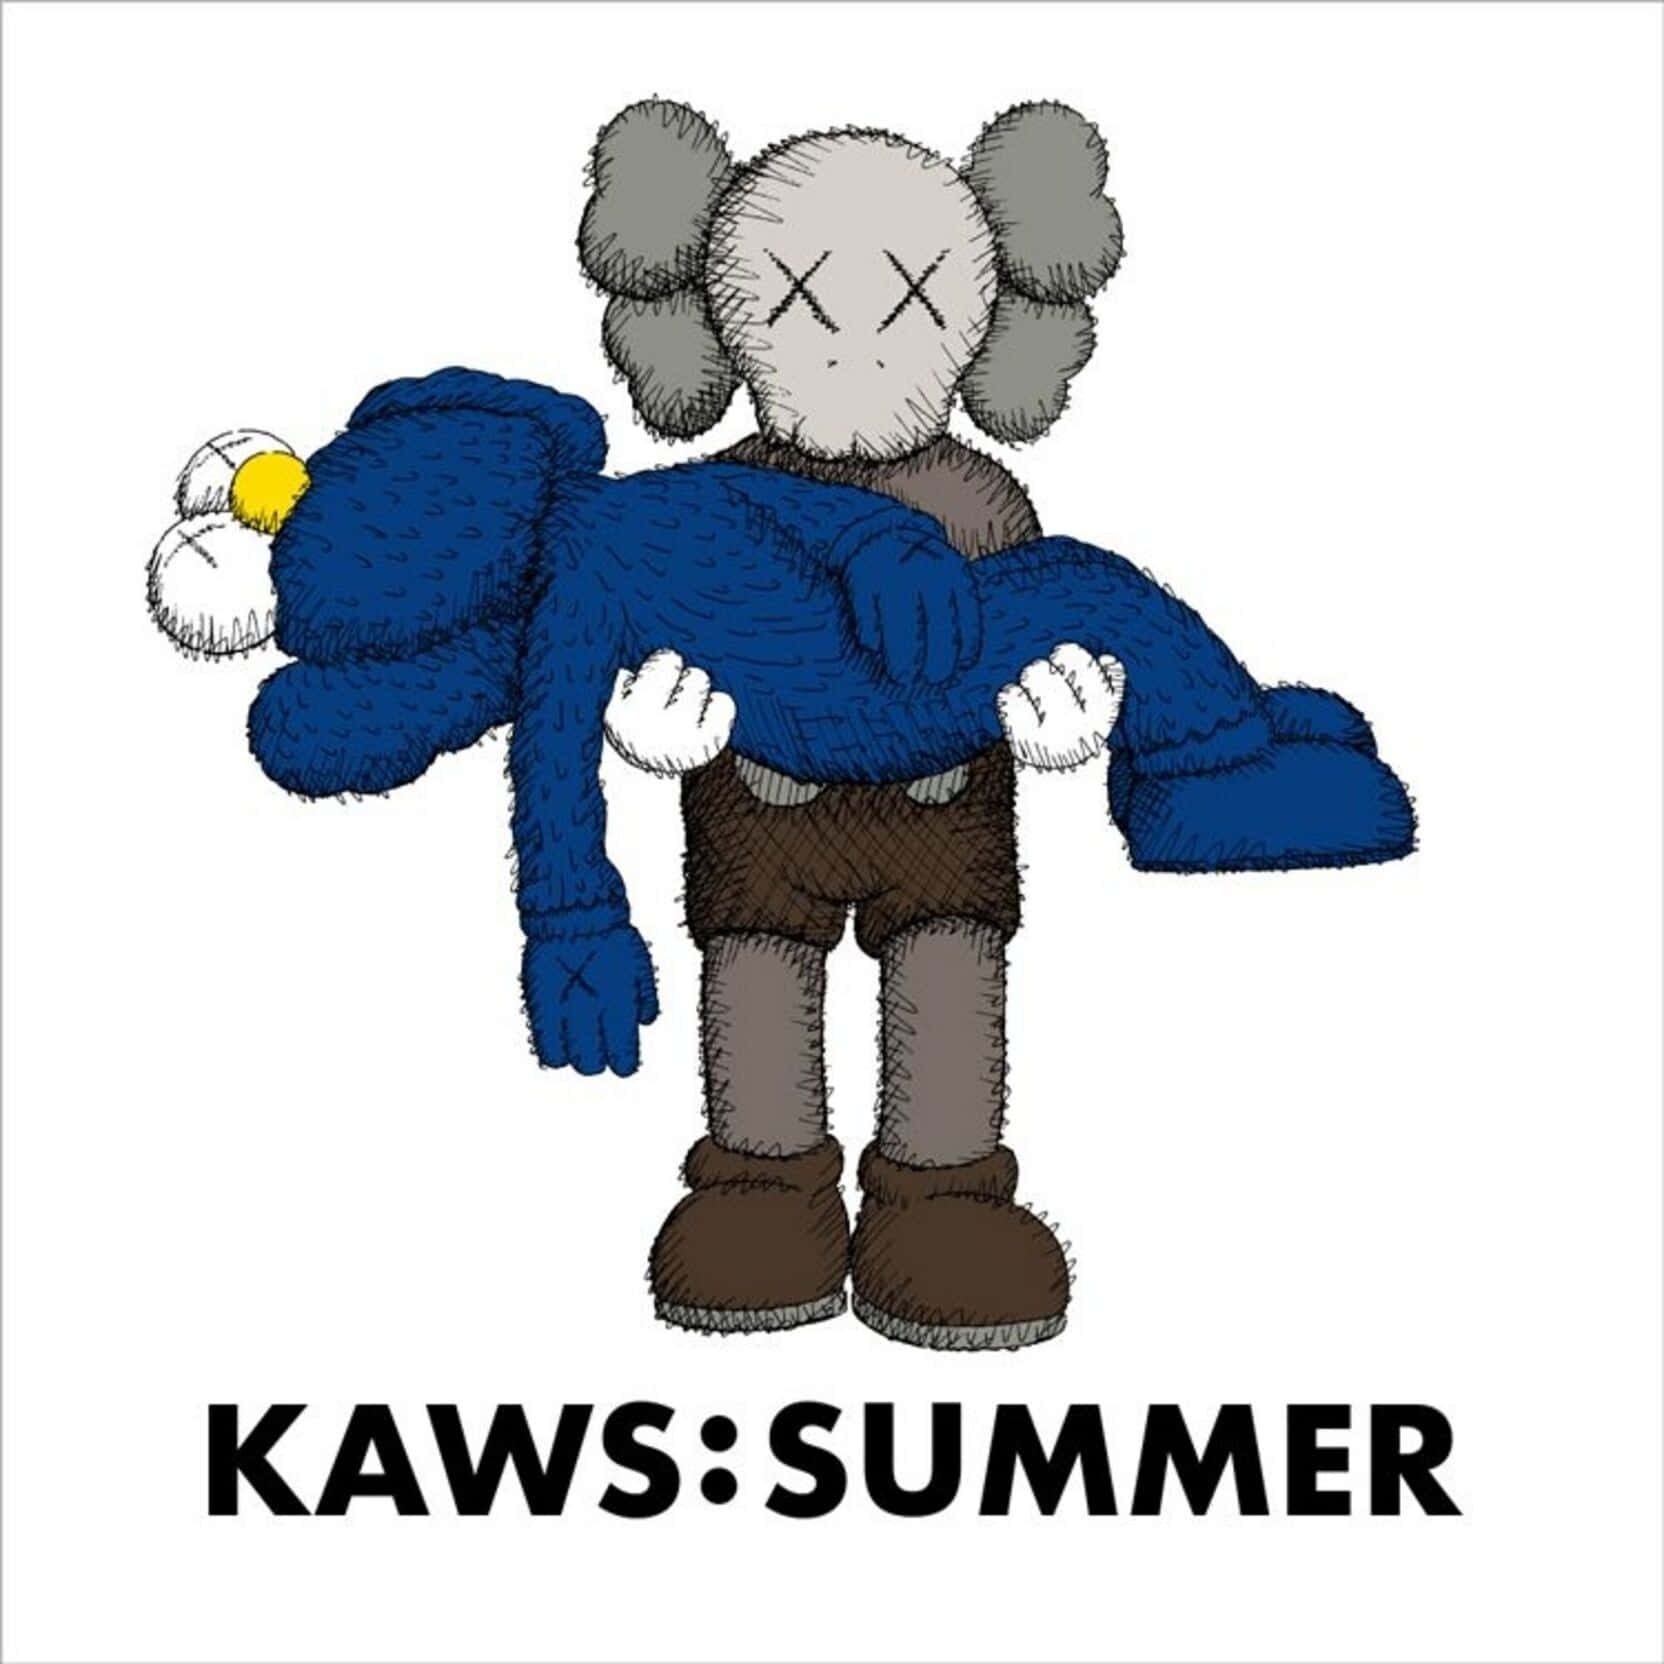 The iconic KAWS character can be found in artwork all over the world.